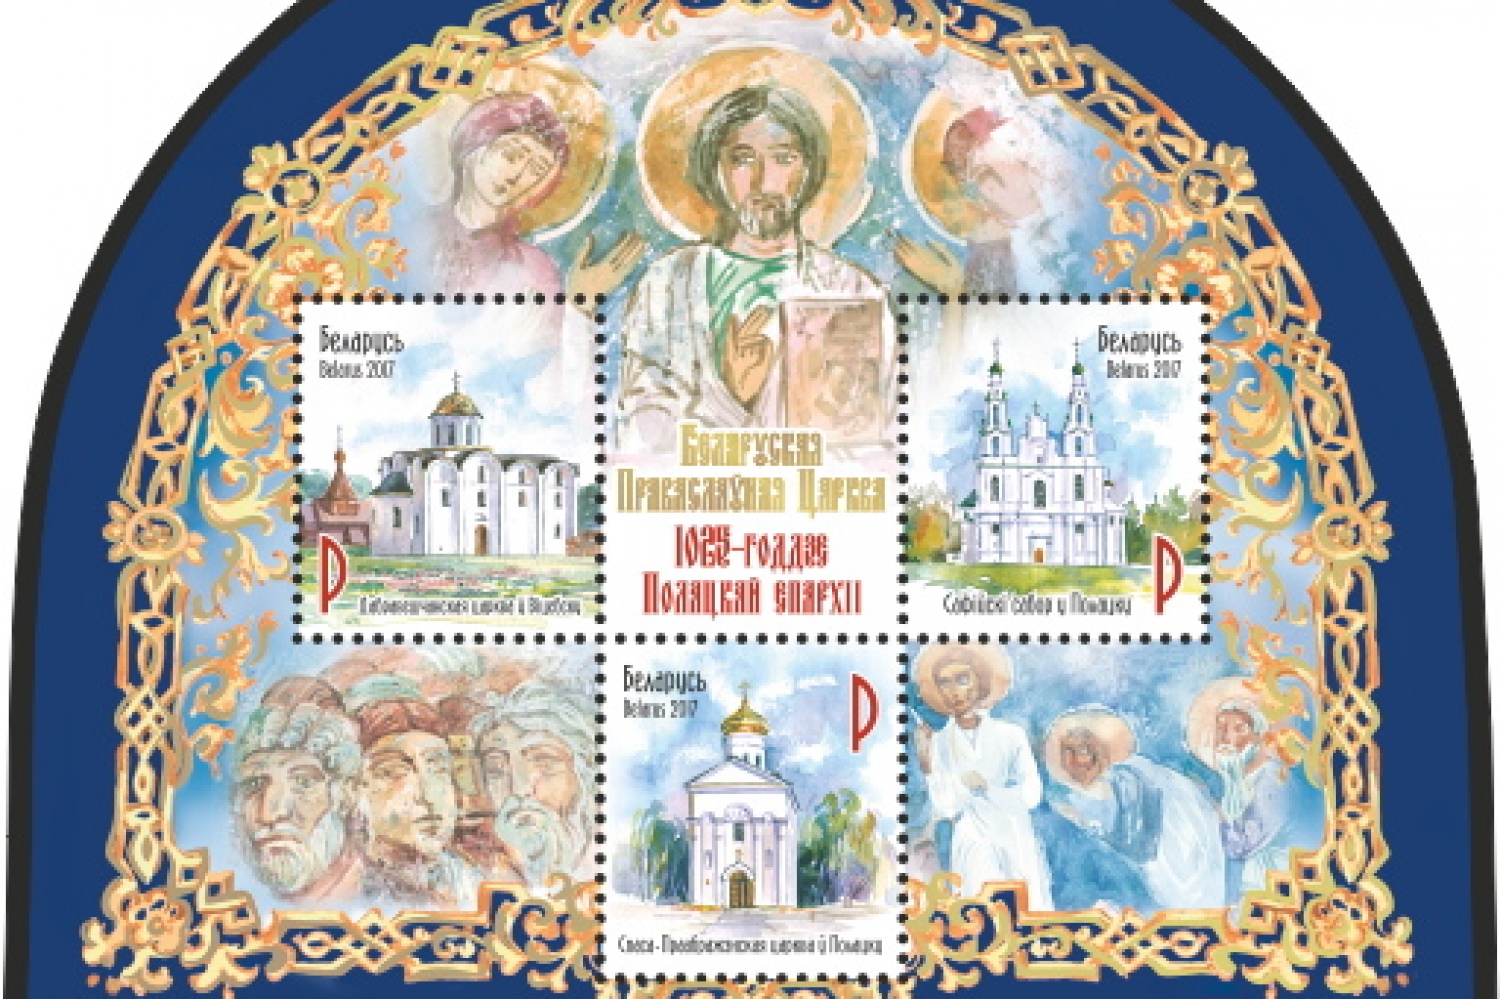 BELARUSIAN ORTHODOX STAMP NAMED ONE OF 10 MOST BEAUTIFUL IN THE WORLD